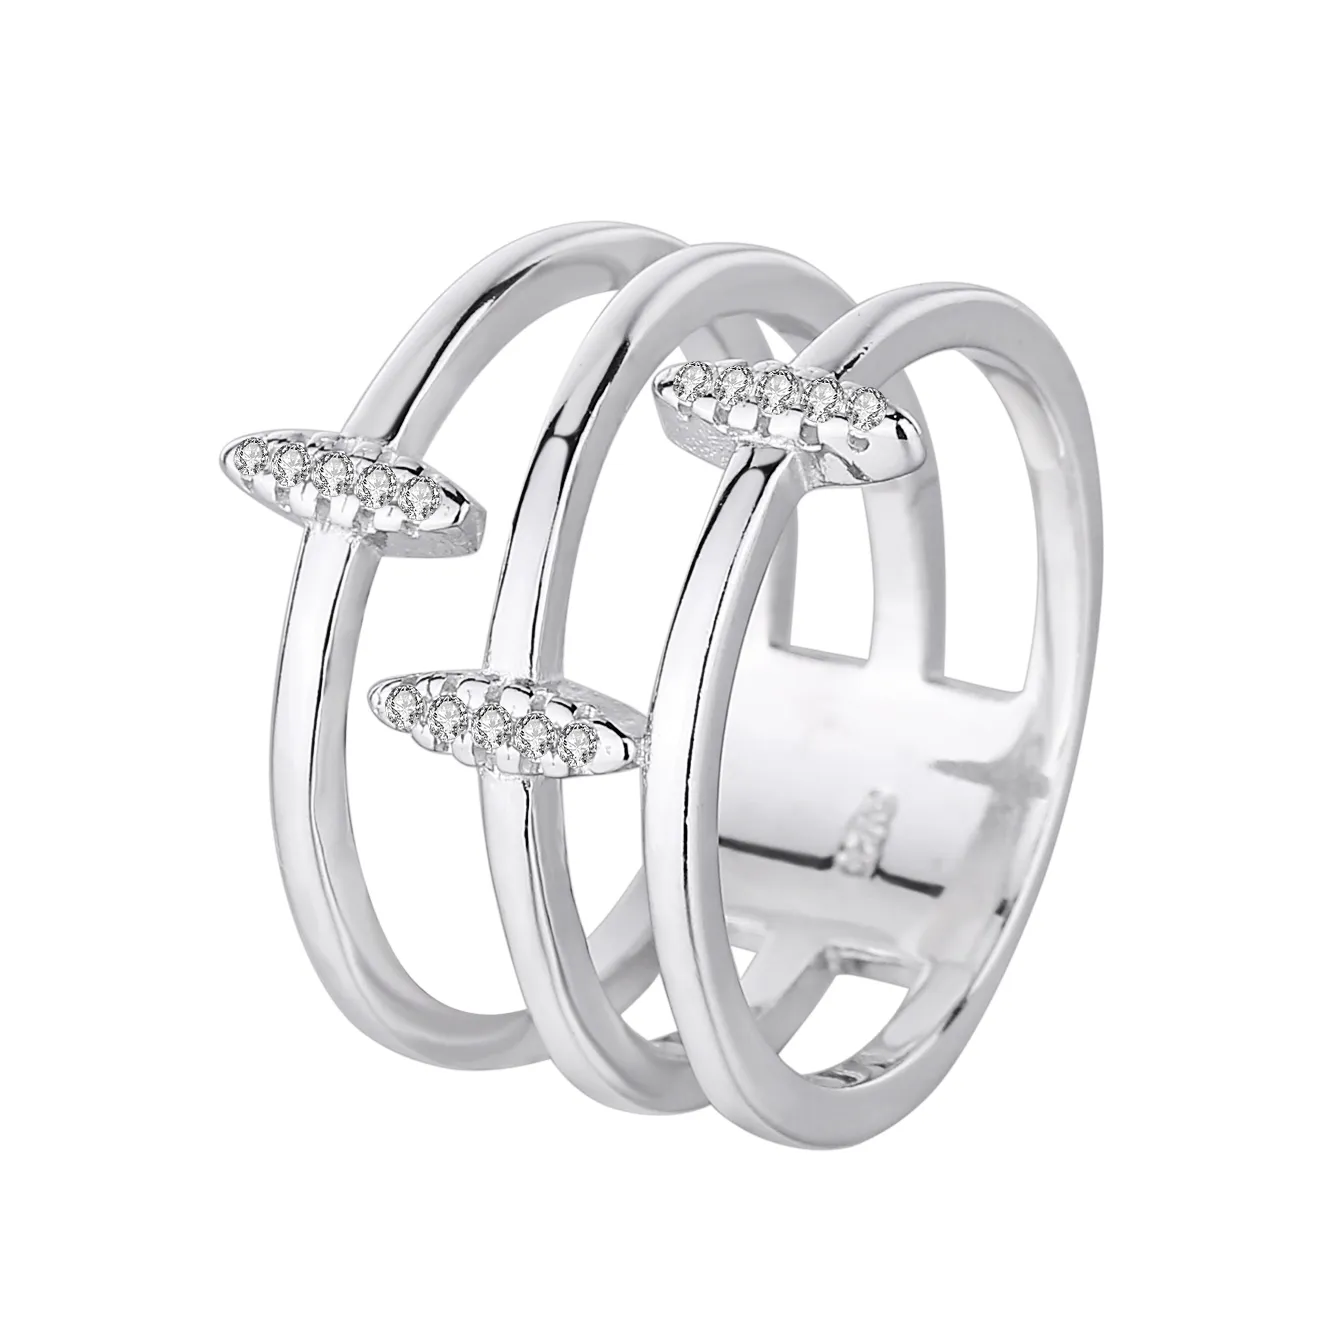 Silver Cubic Zirconia Band Ring 70100036